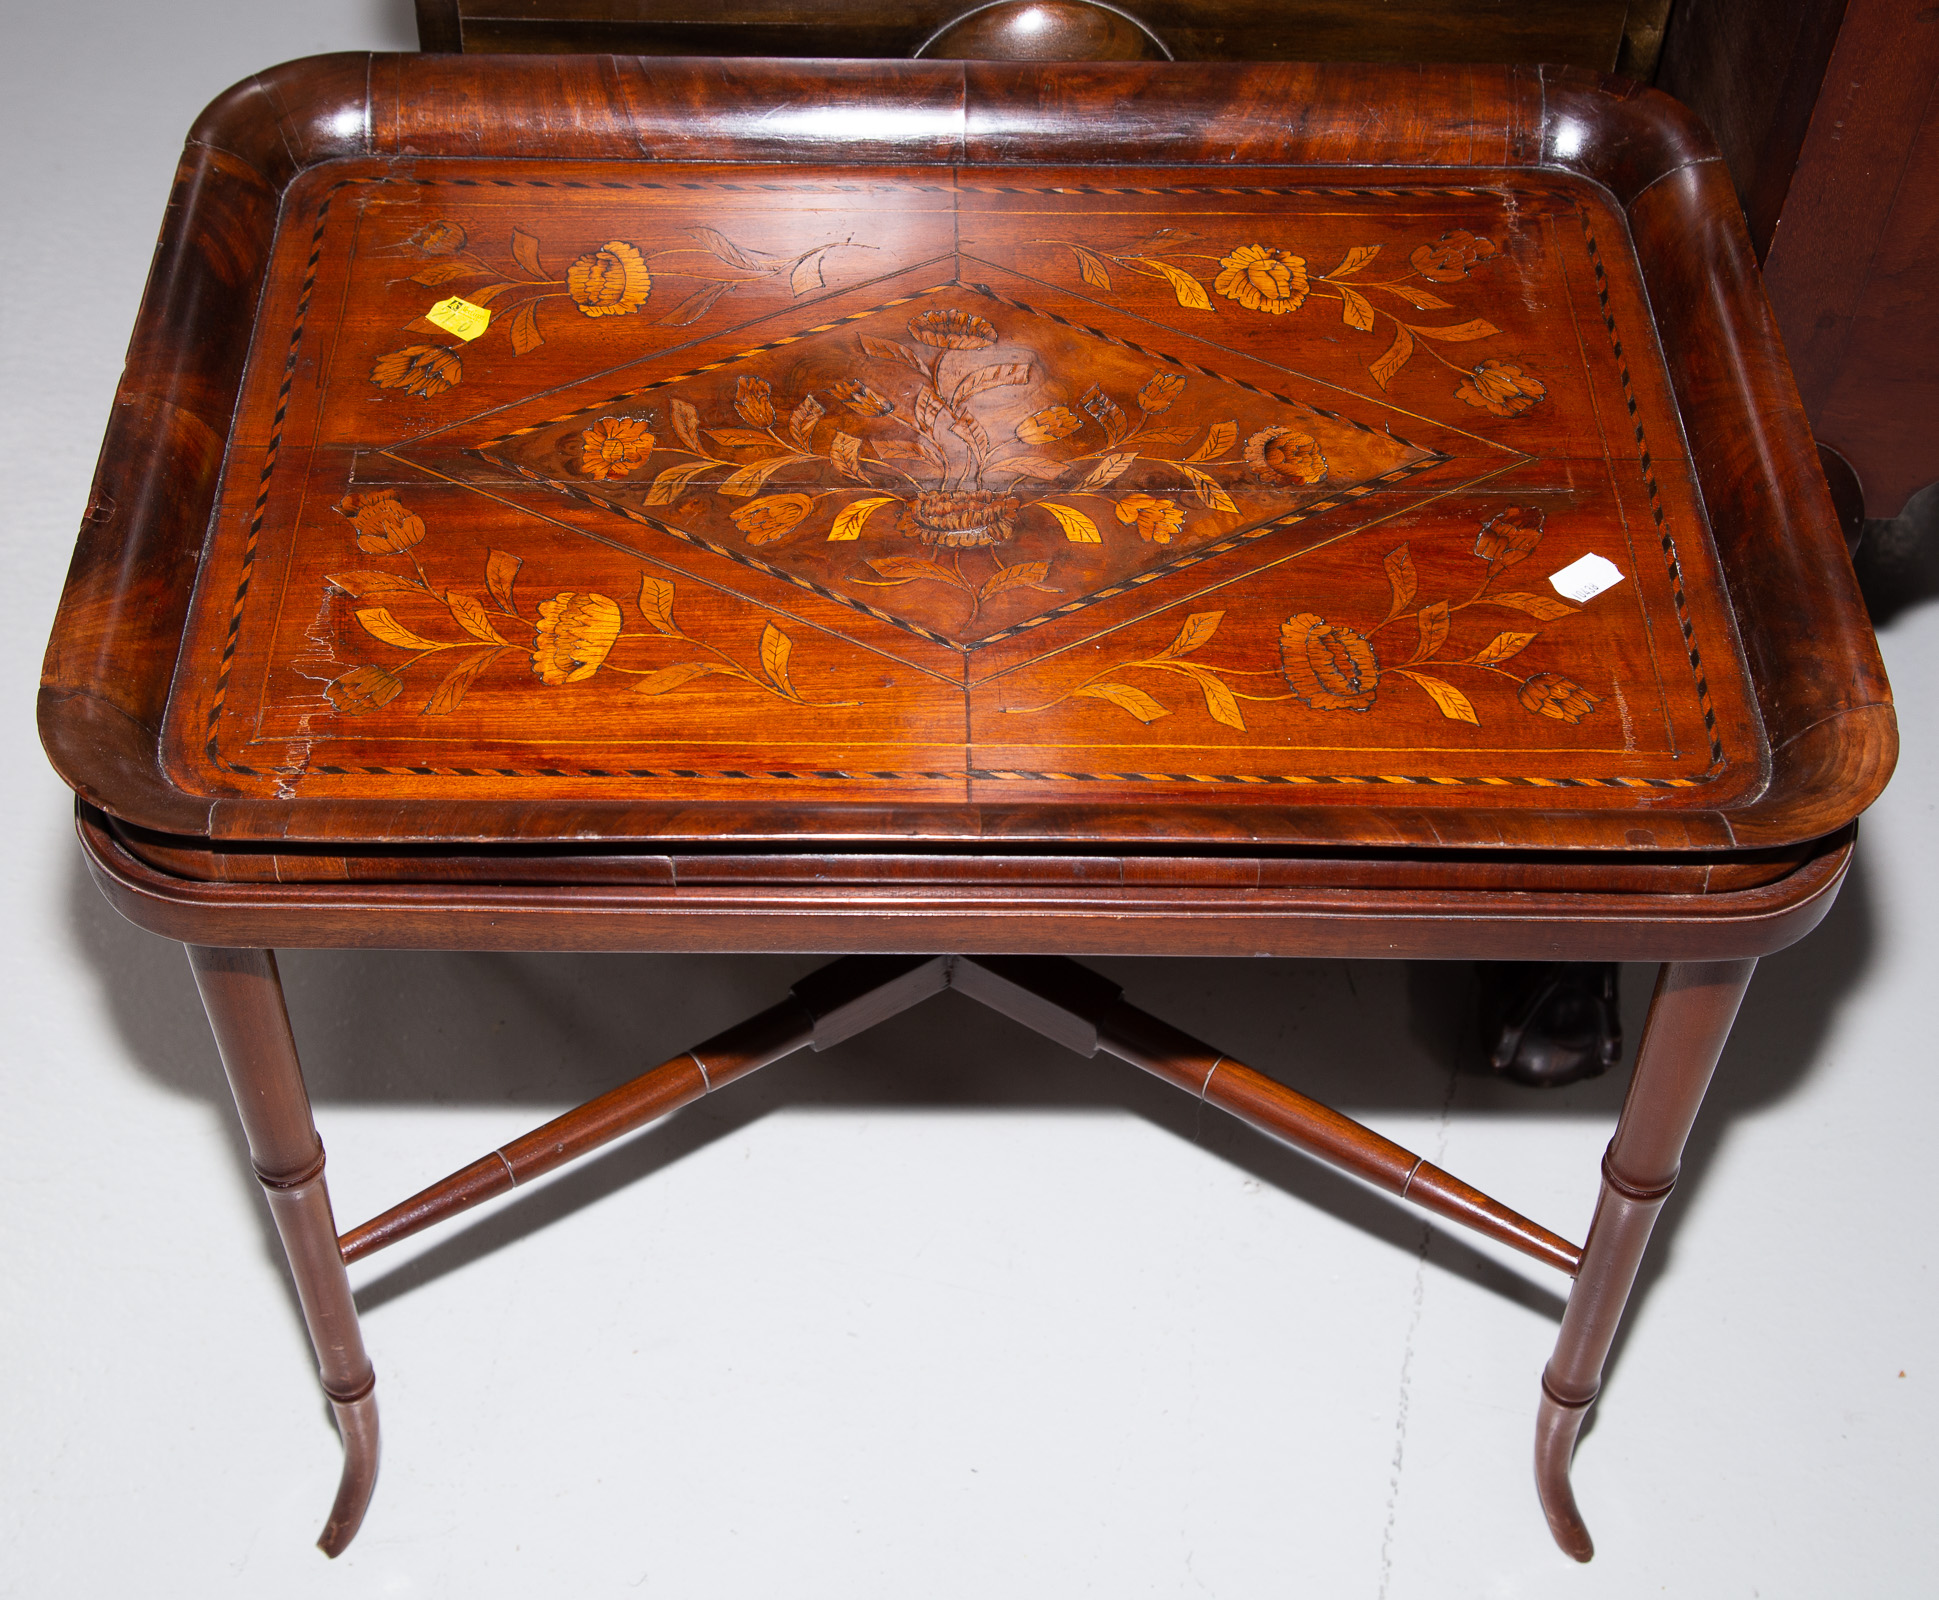 DUTCH MARQUETRY INLAID TRAY TABLE